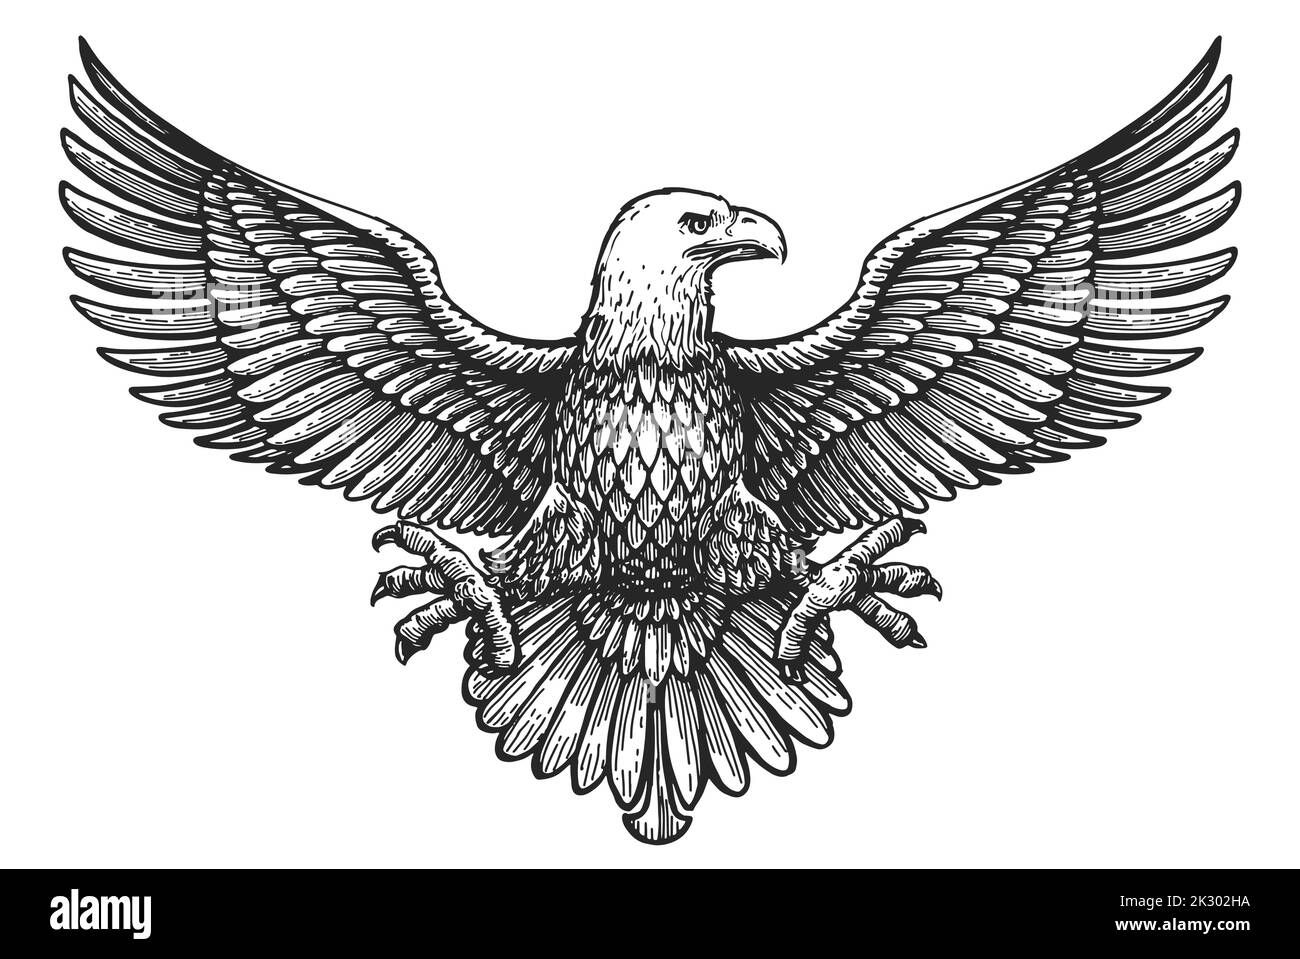 Eagle with spread wings. Royal symbol hand drawn sketch in vintage engraving style. Vector illustration Stock Vector